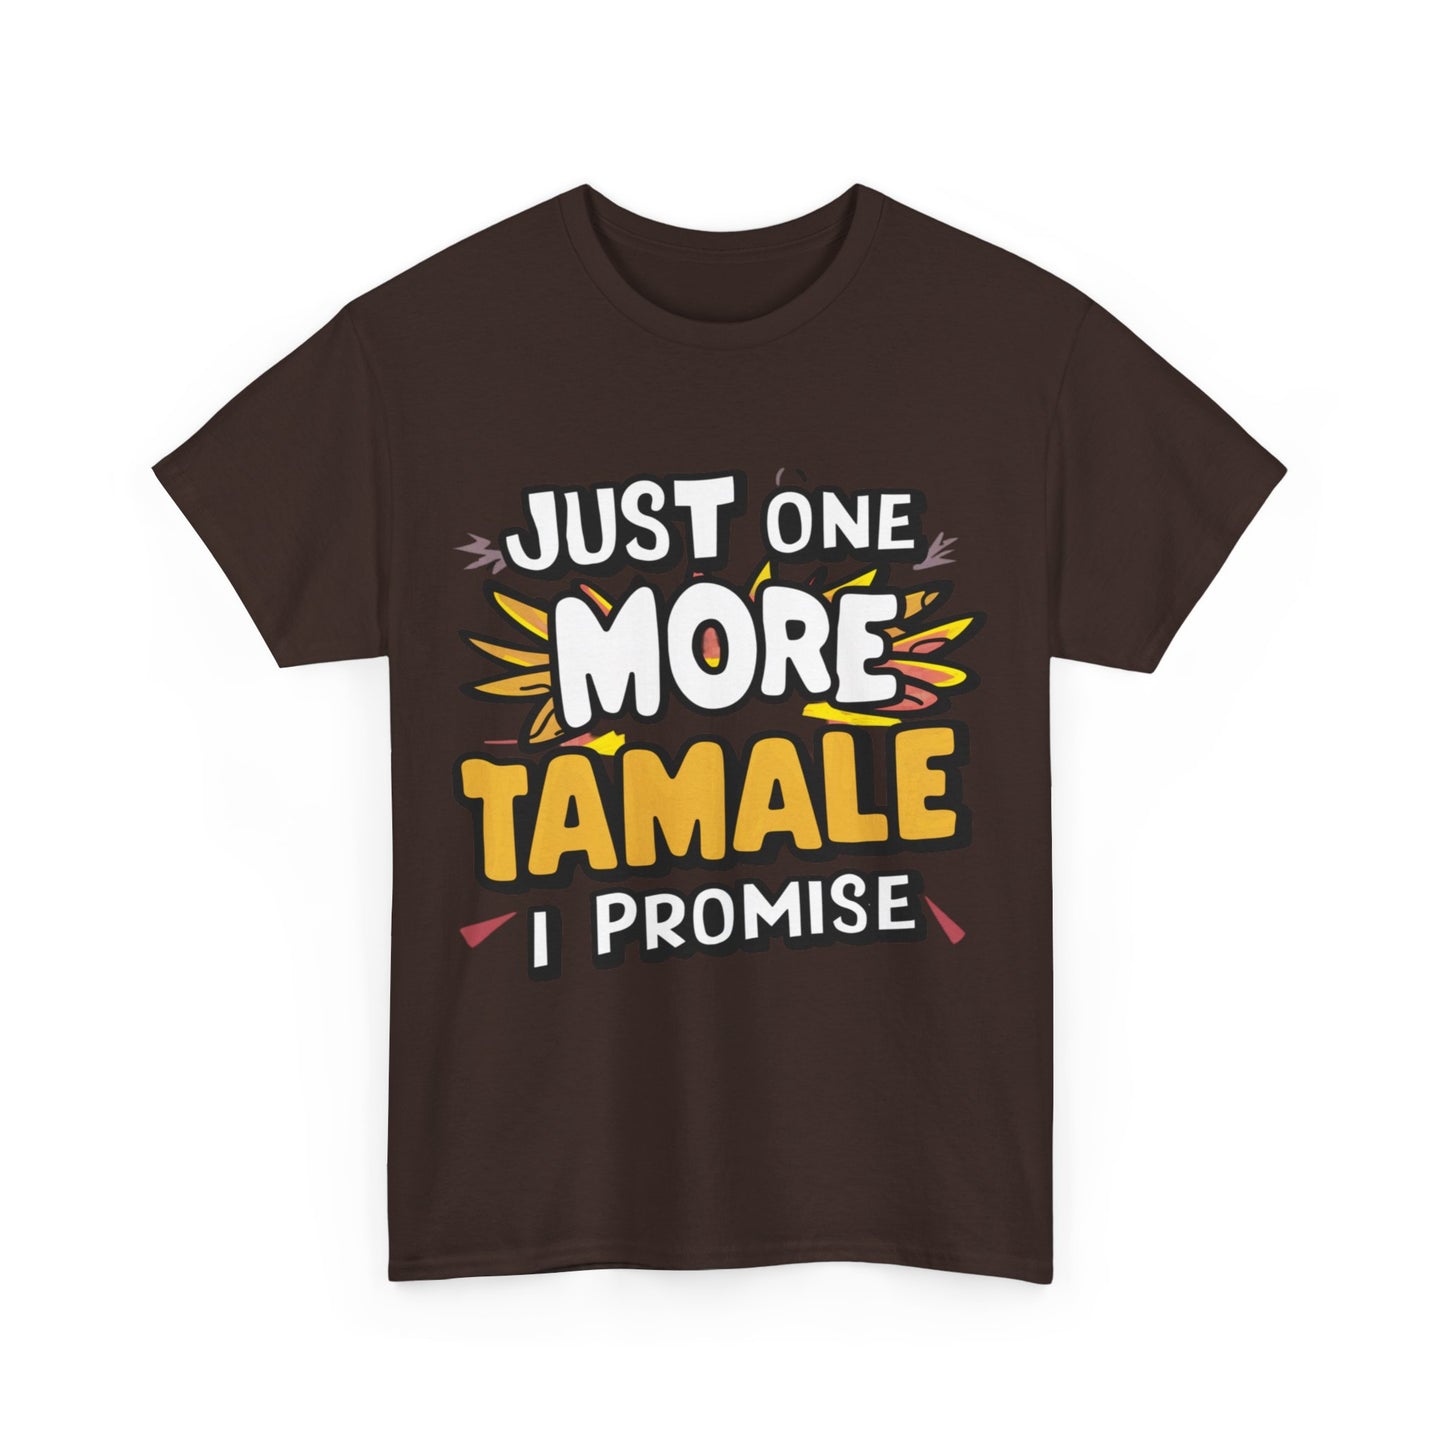 Just One More Tamale I Promise Mexican Food Graphic Unisex Heavy Cotton Tee Cotton Funny Humorous Graphic Soft Premium Unisex Men Women Dark Chocolate T-shirt Birthday Gift-21